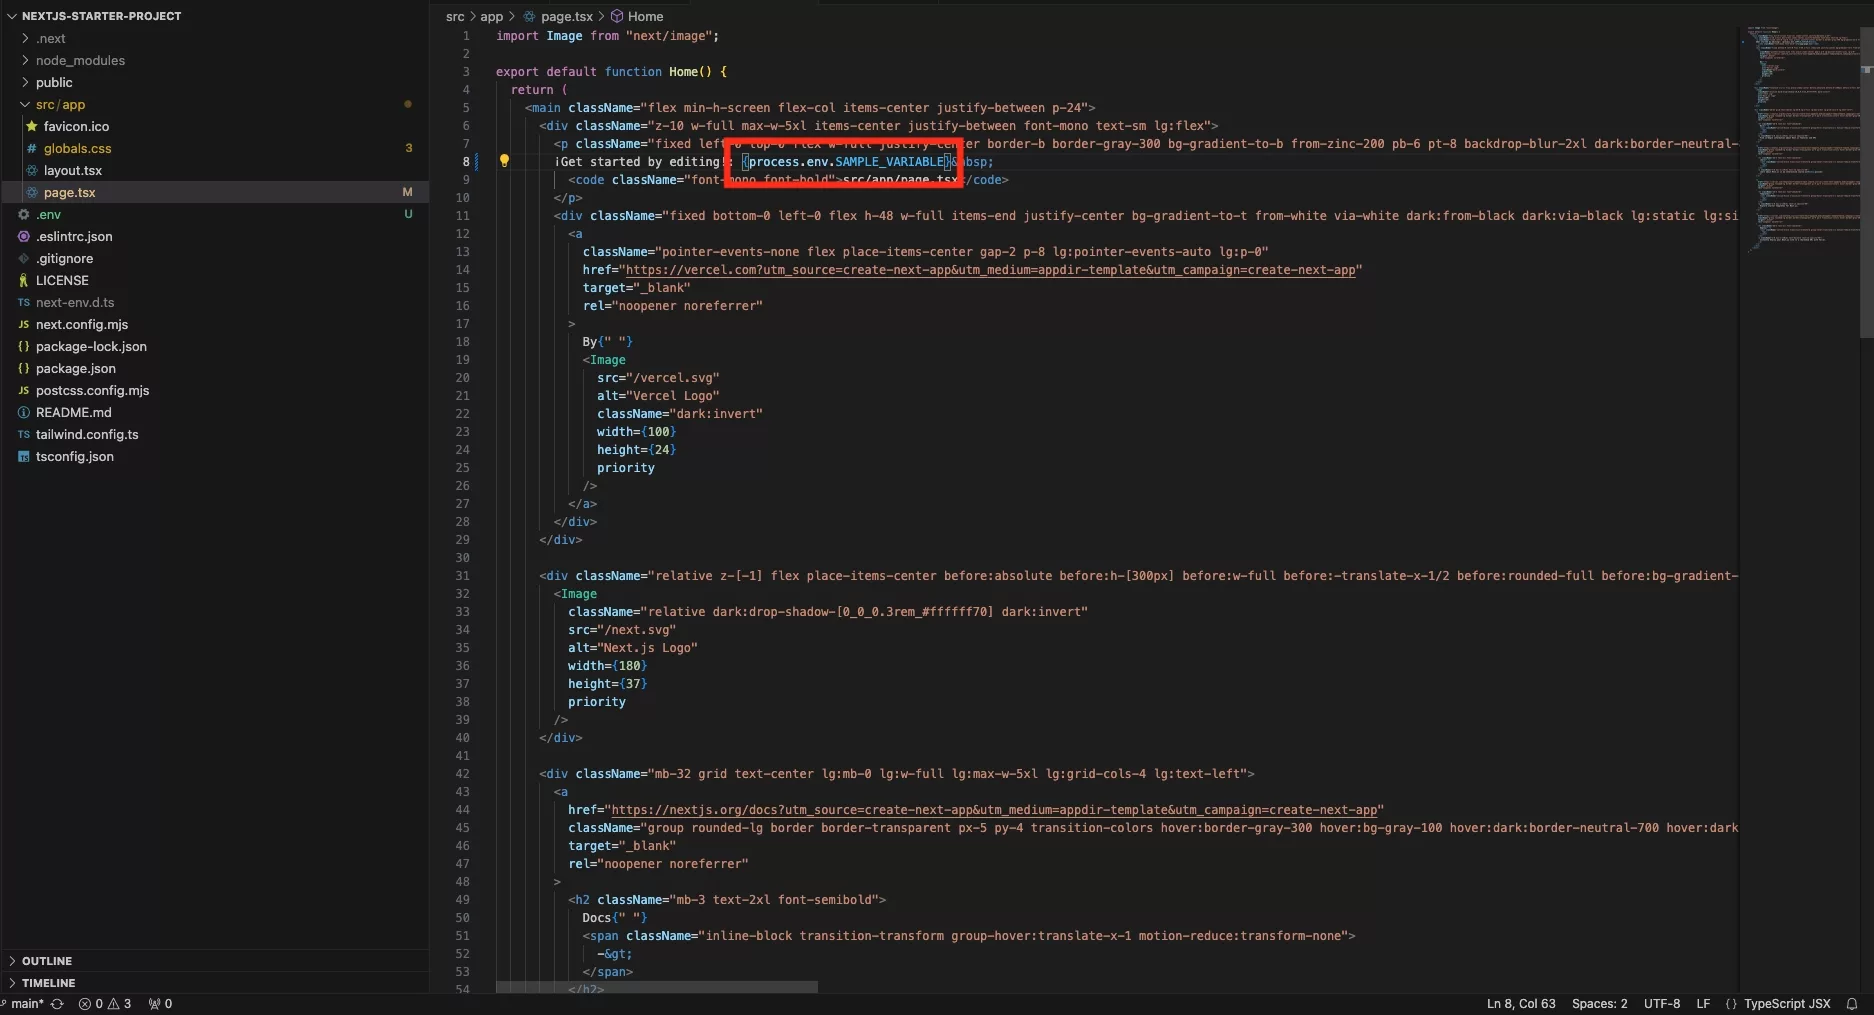 A screenshot of VSCode showing how we used the environment variable through process.env.SAMPLE_VARIABLE.